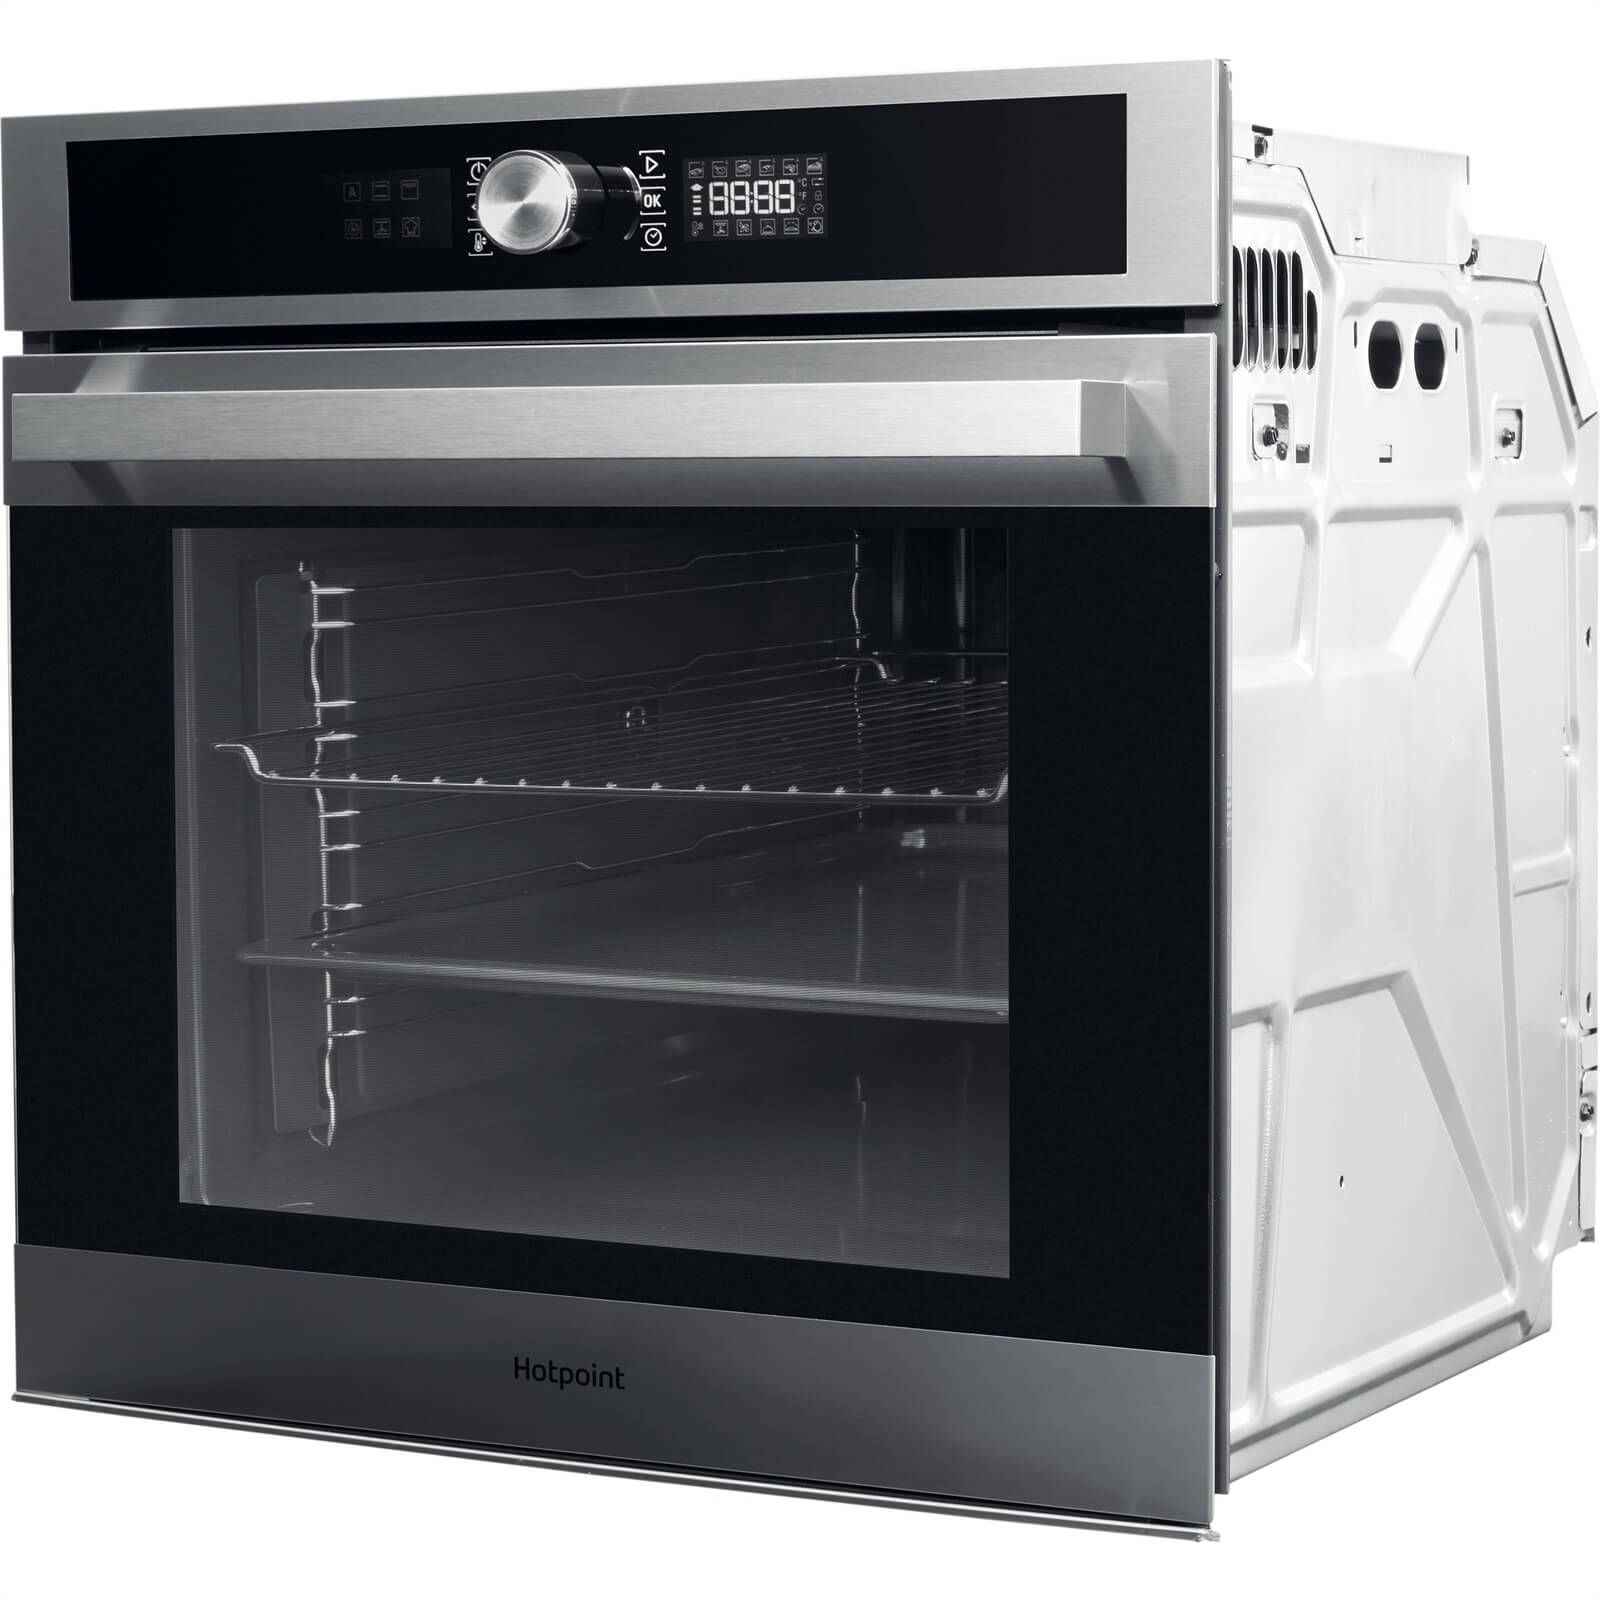 Hotpoint Class 5 SI5 851 H IX Built-in Oven - Stainless Steel